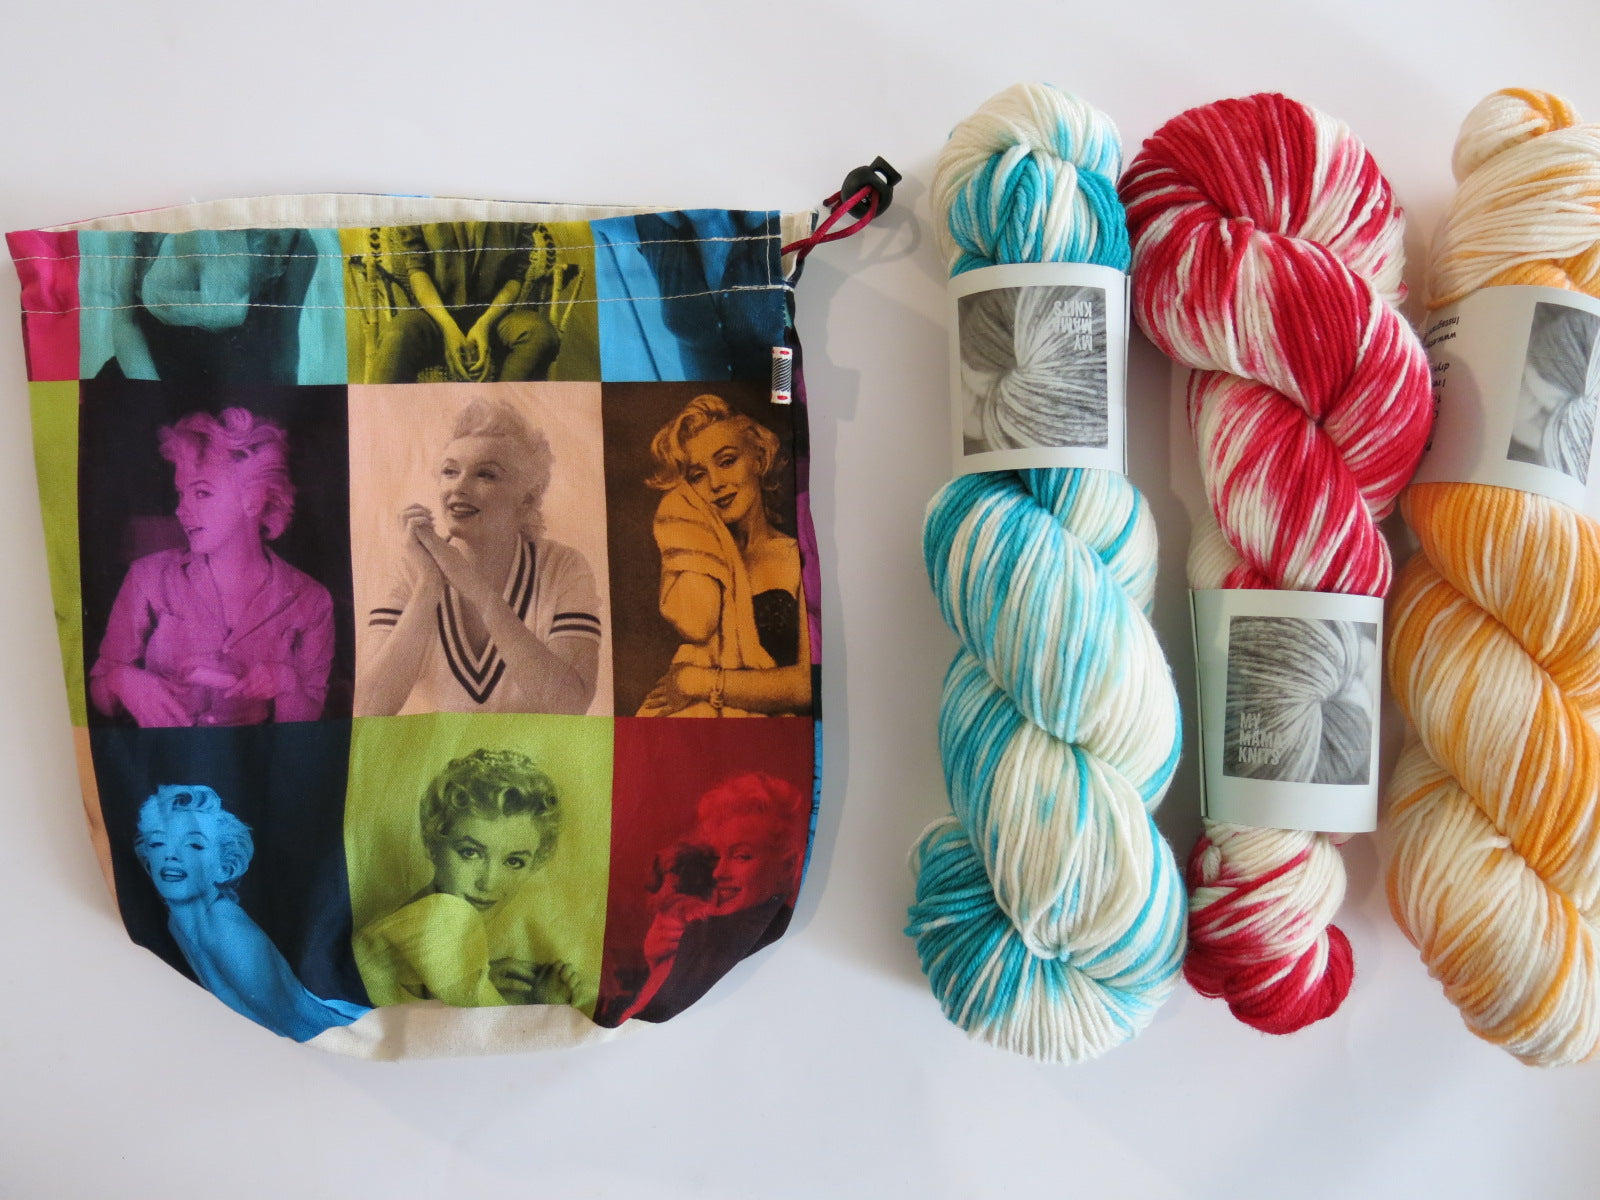 hollywood themed marilyn monroe cotton bag for projects